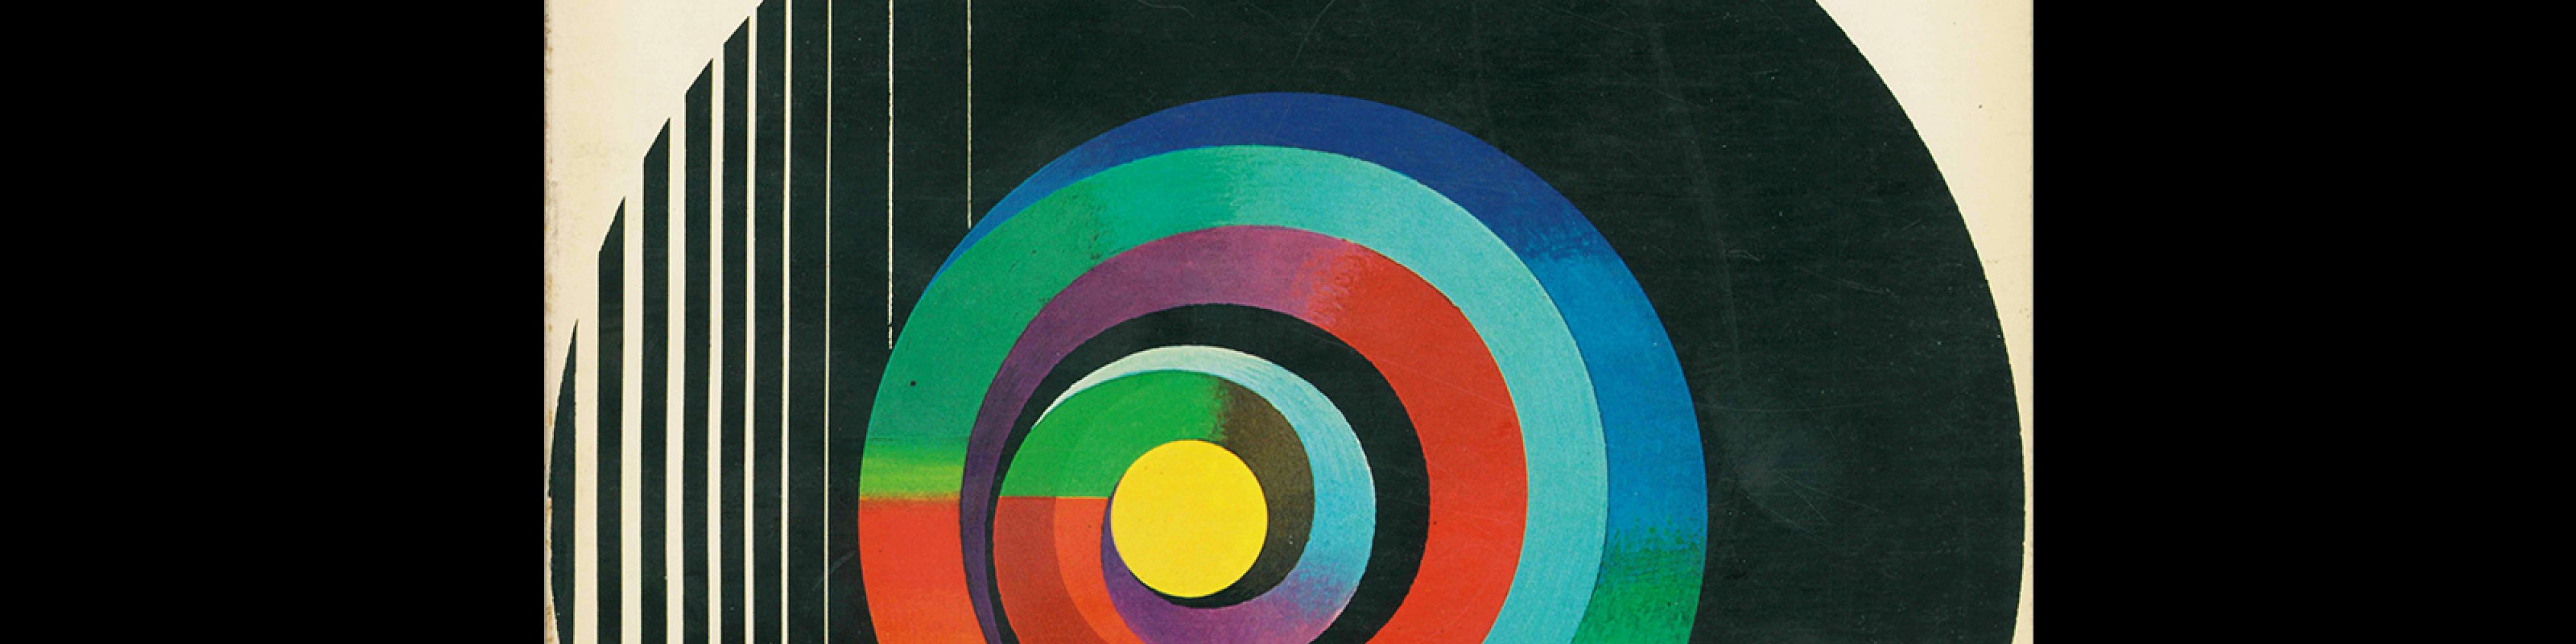 Idea 96, 1969. Cover design by Jacques Nathan-Garamond